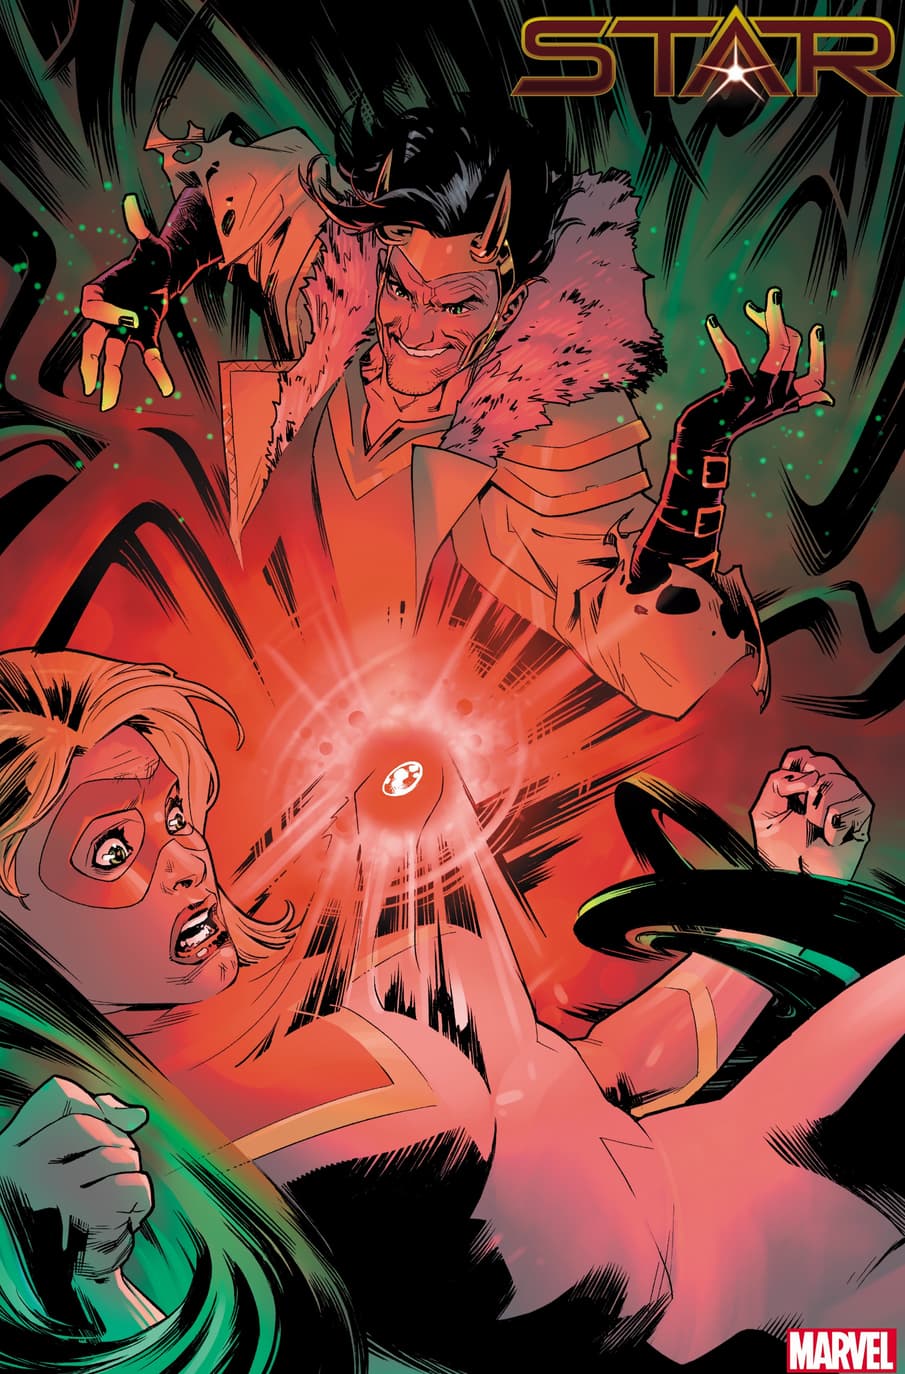 STAR #1 preview art by Javier Pina and Filipe Andrade with colors by Jesus Aburtov